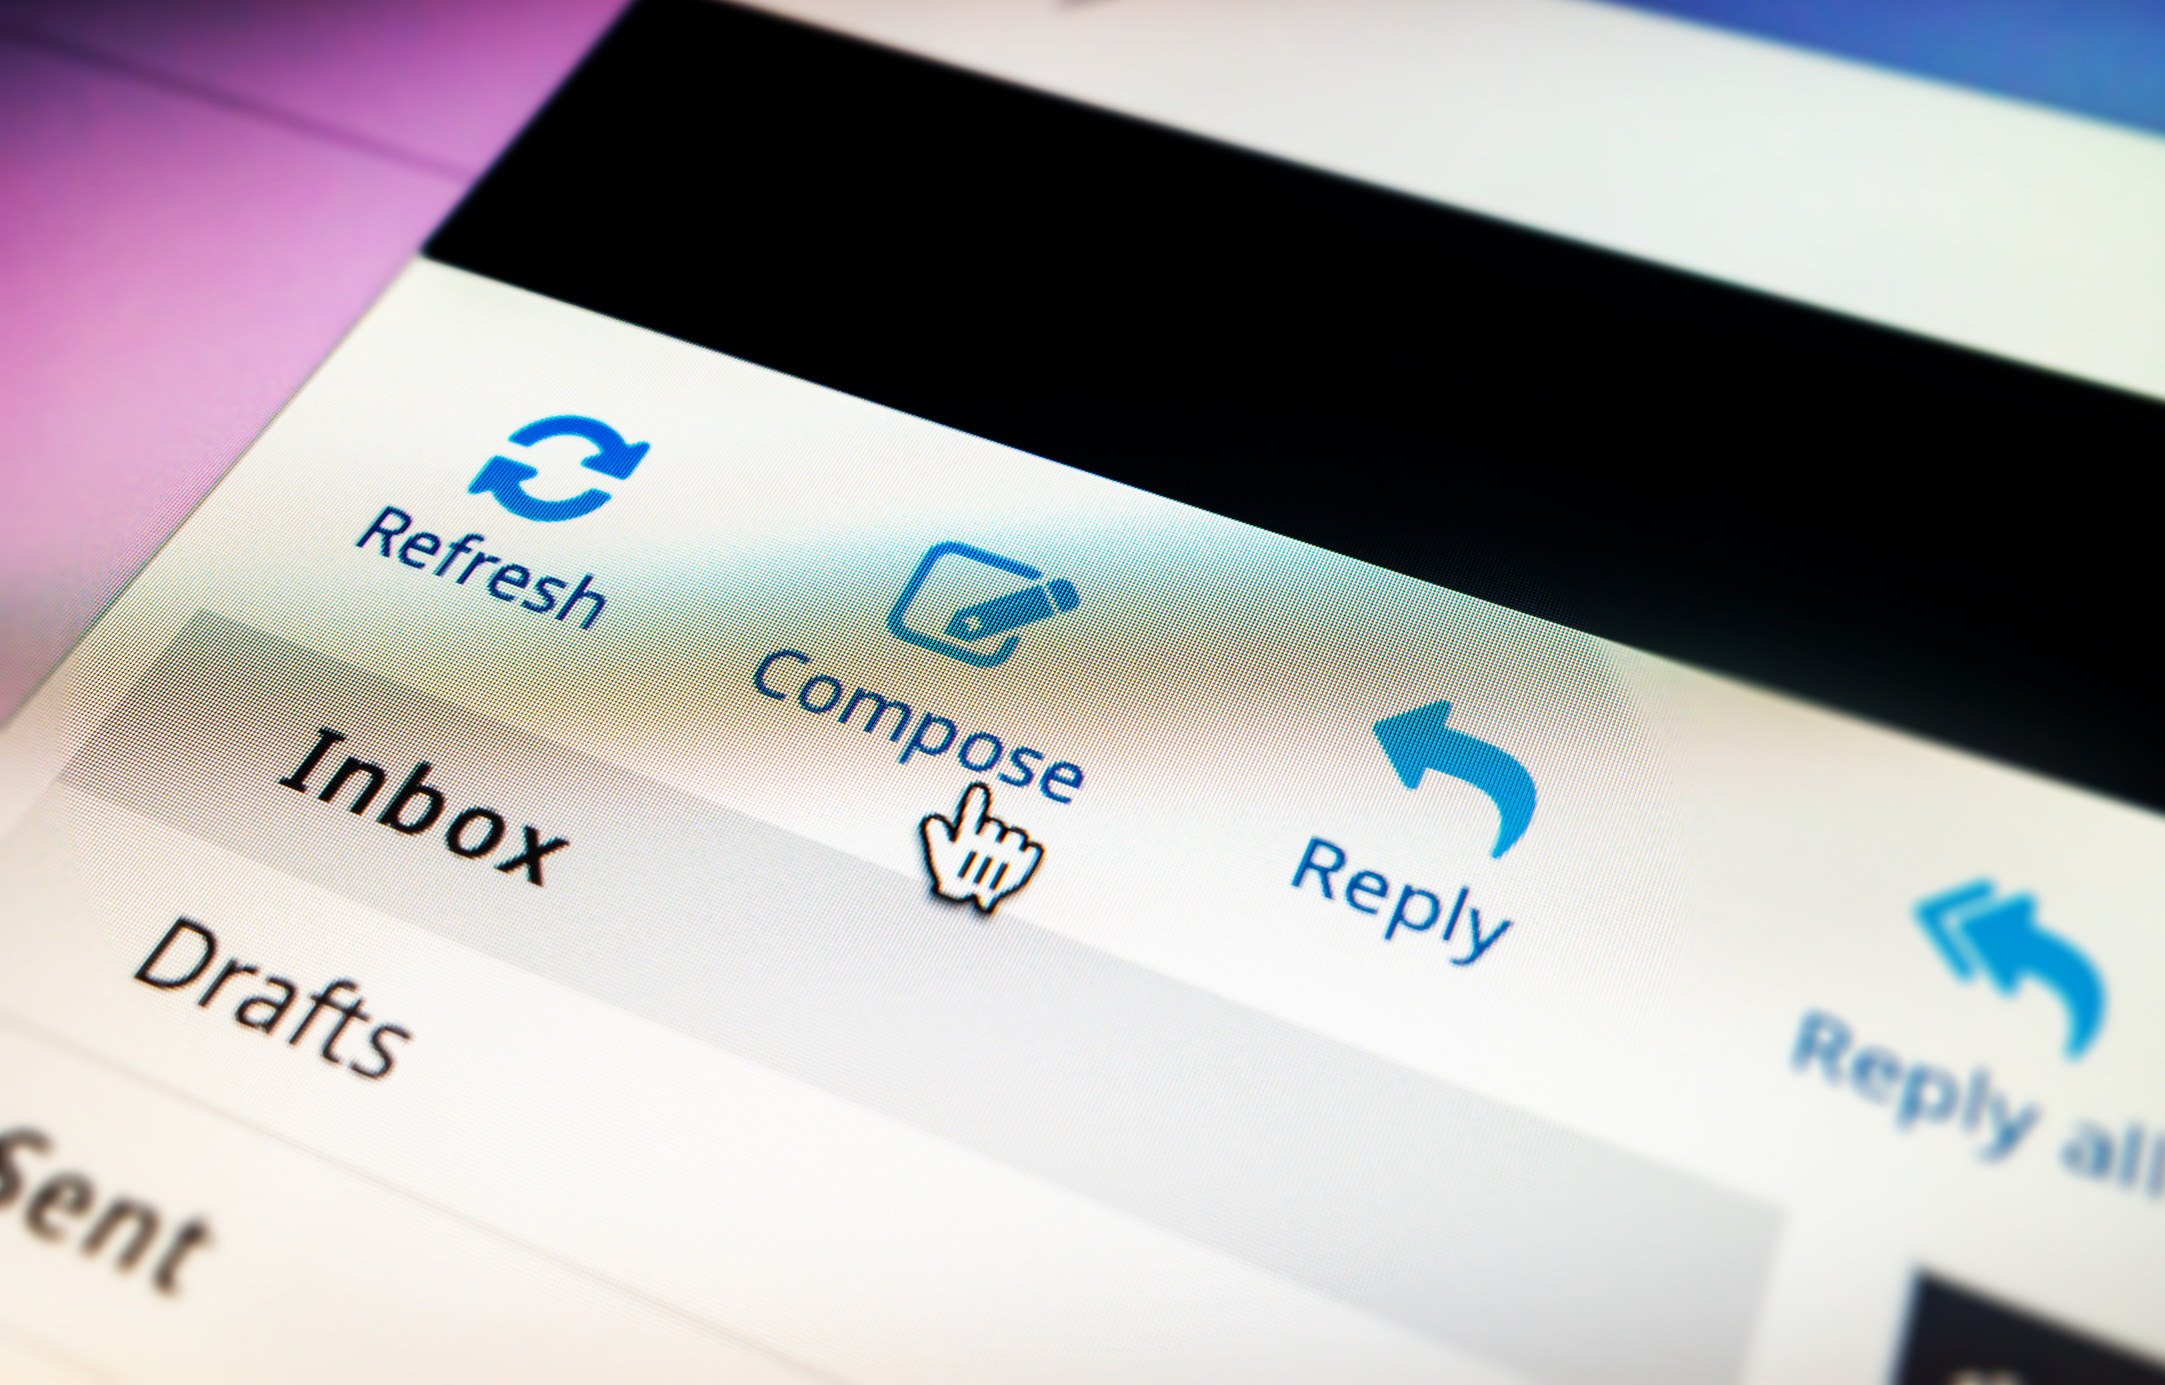 Cursor hovering over &#x27;Compose&#x27; button in an email application&#x27;s toolbar